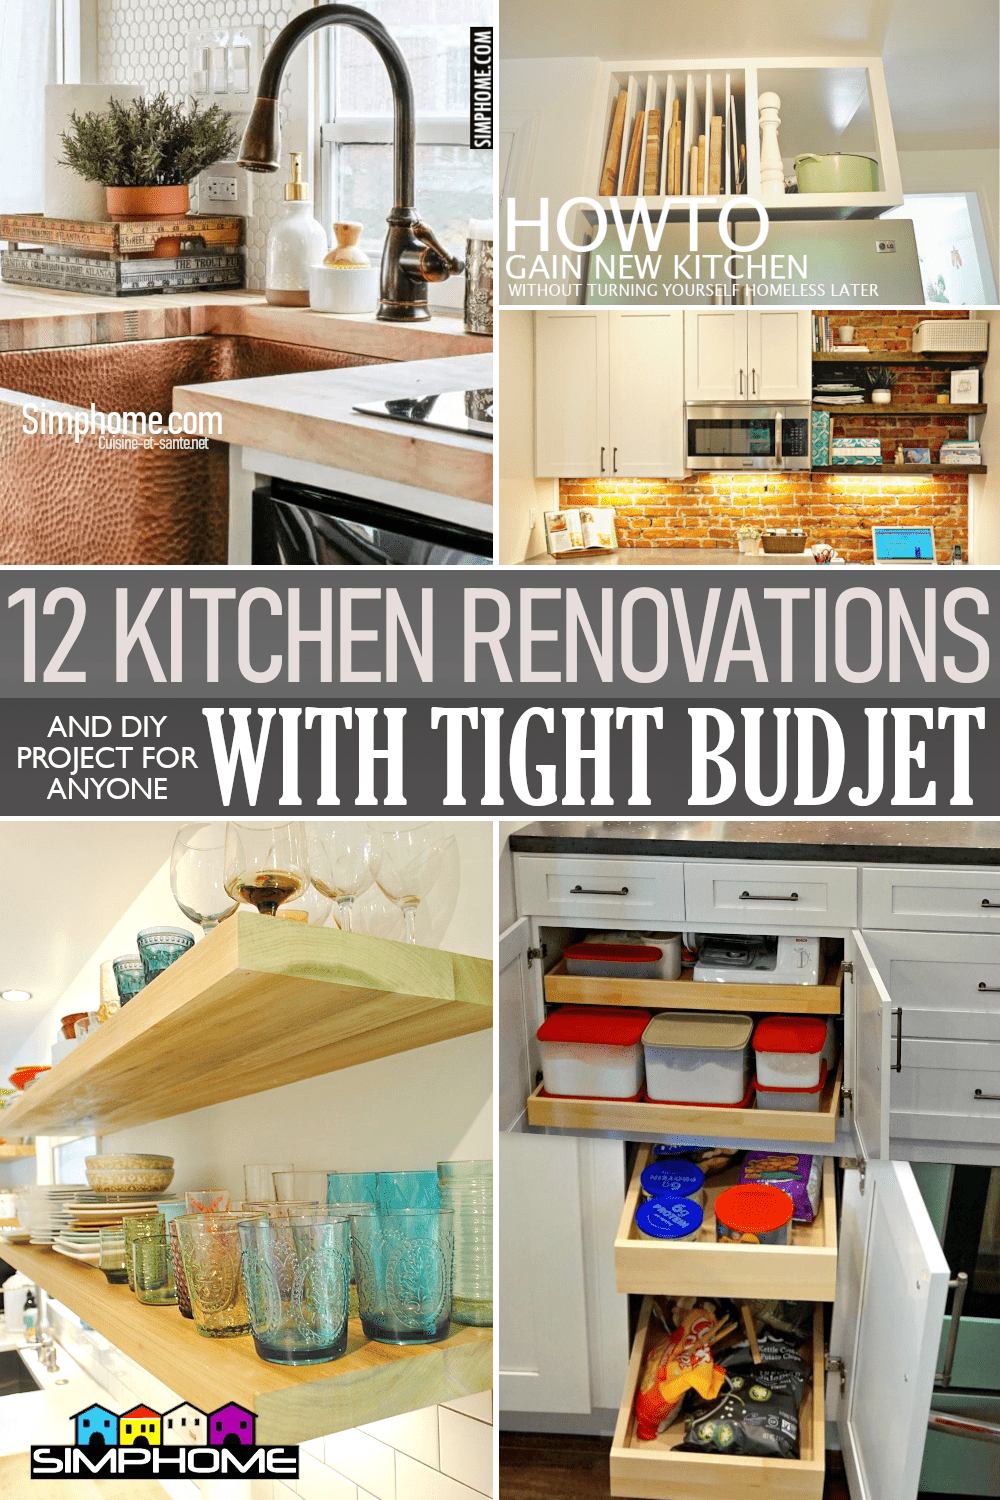 12 Small Kitchen Renovation Ideas On A Budget via Simphome.comFeatured